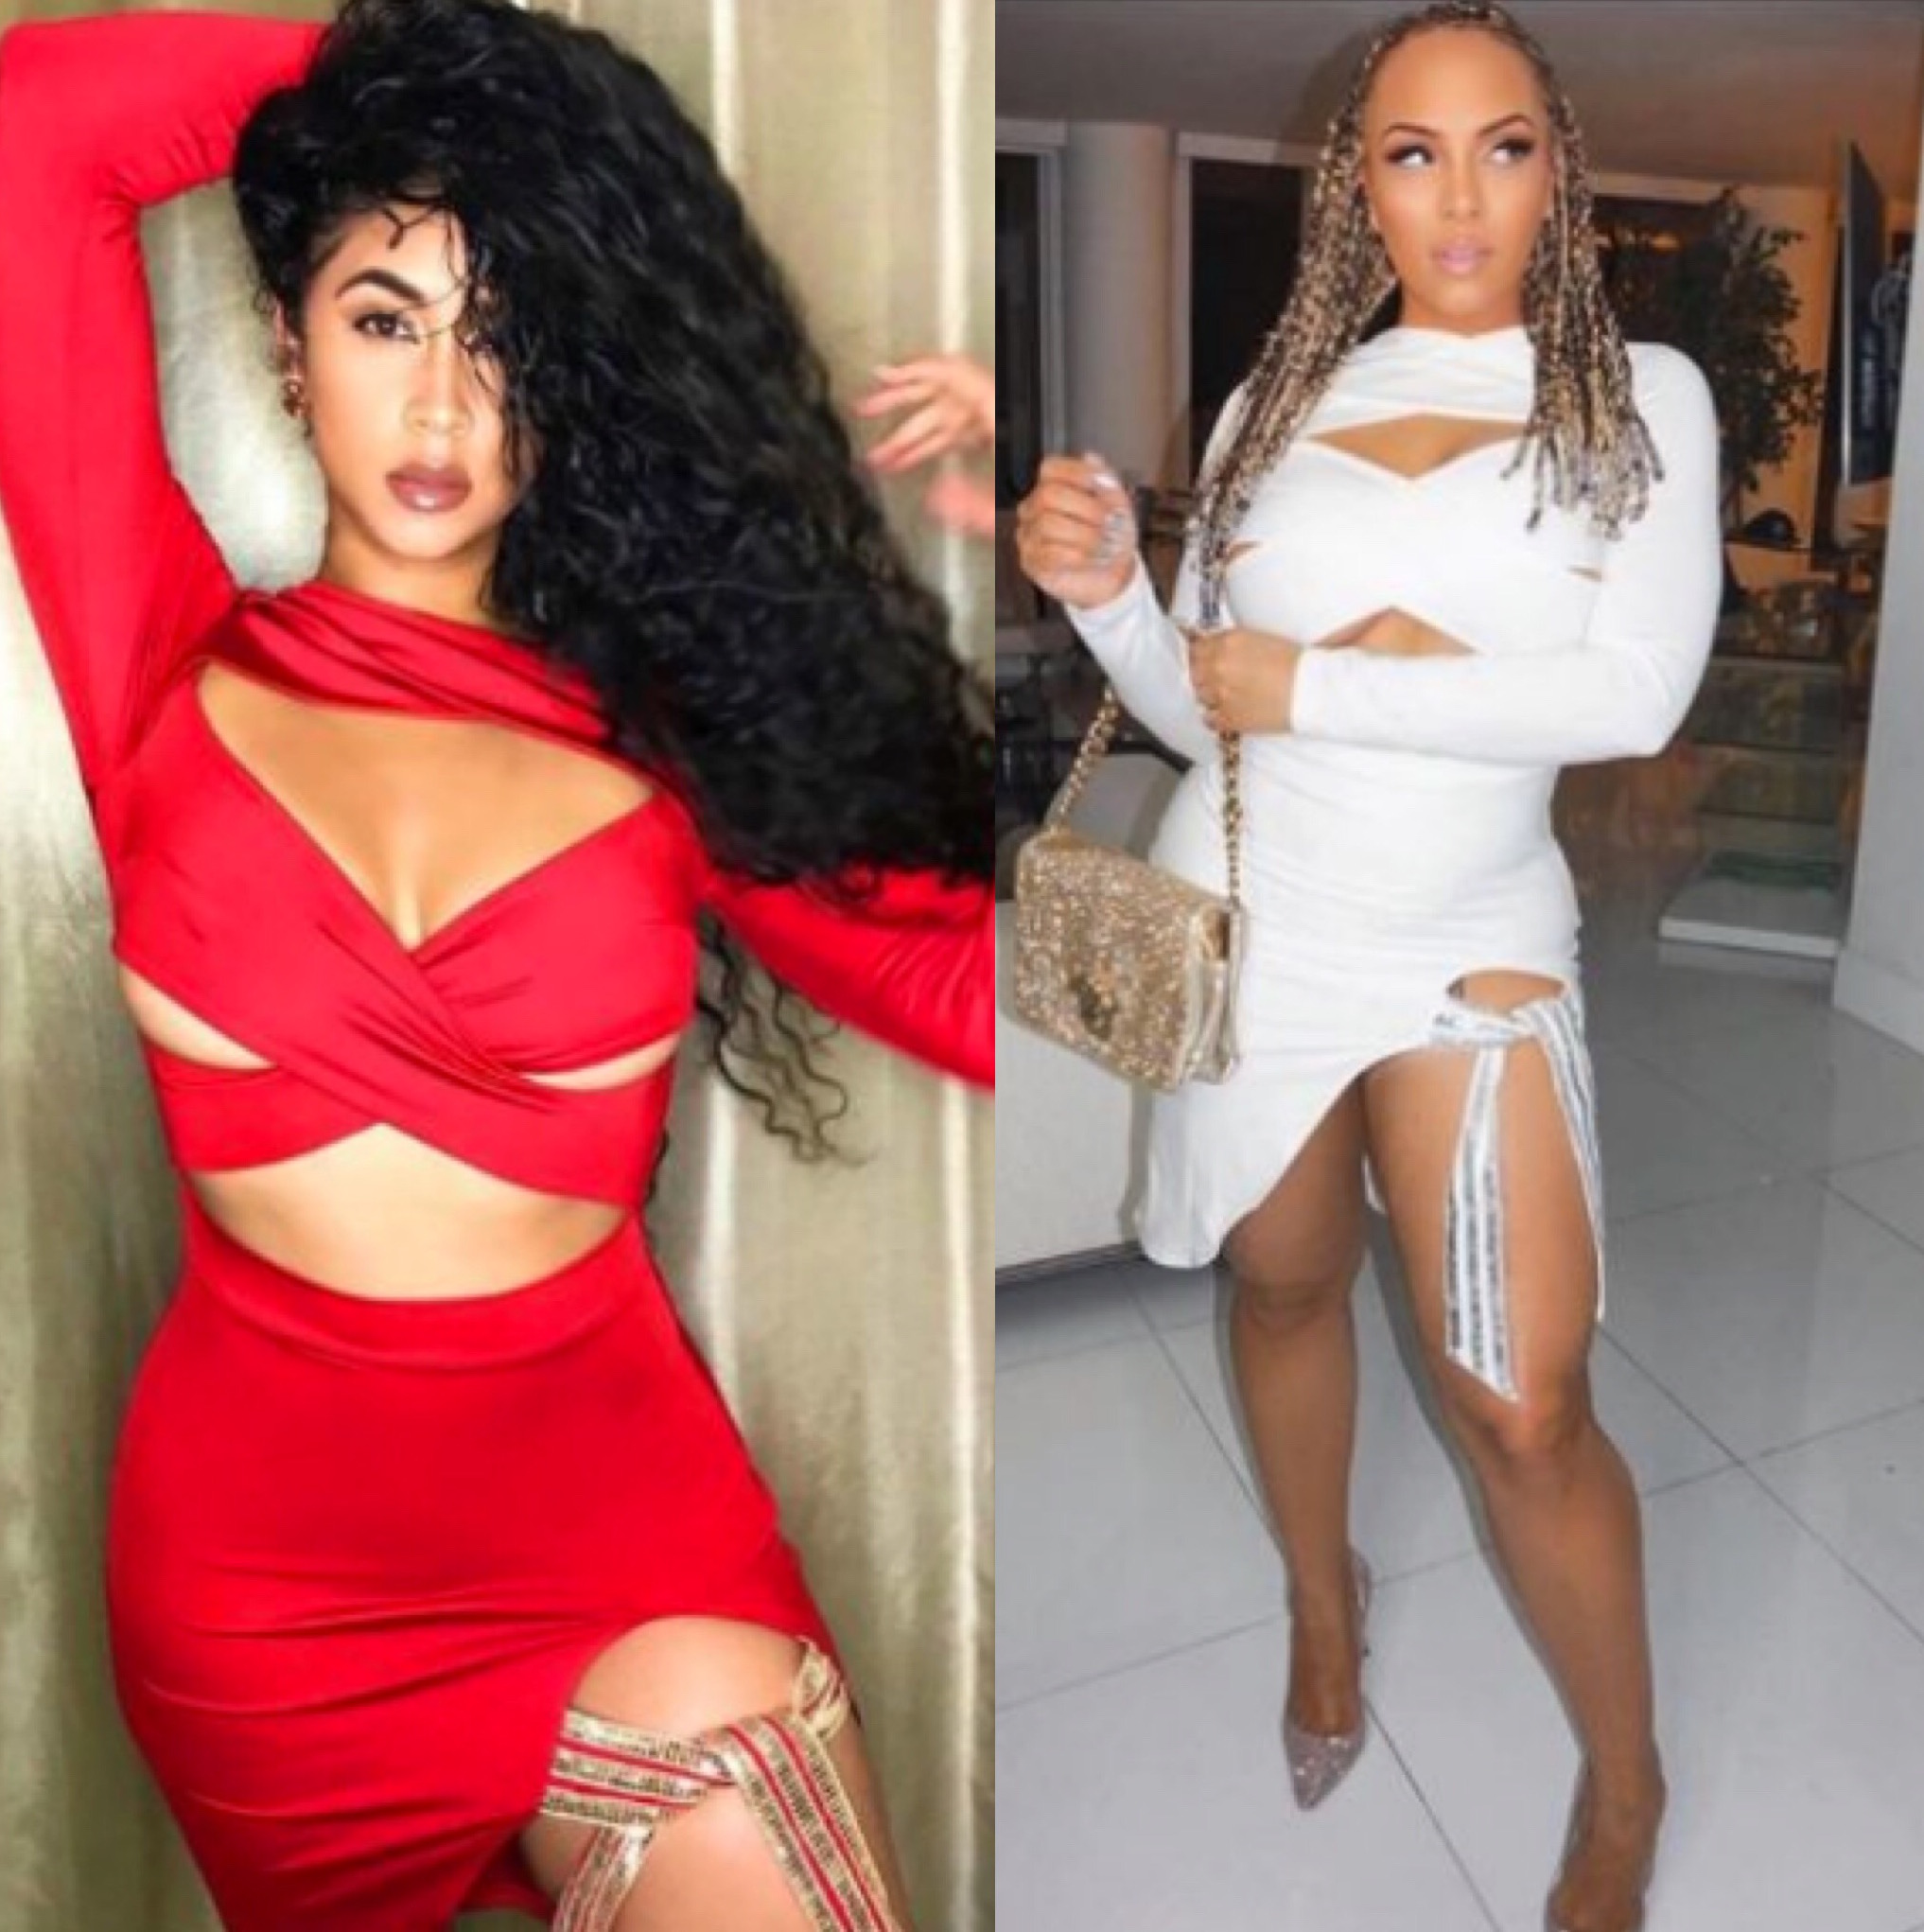 Both Kimbella and Darnell Nicole have been spied rocking Fashion Nova’s $40...